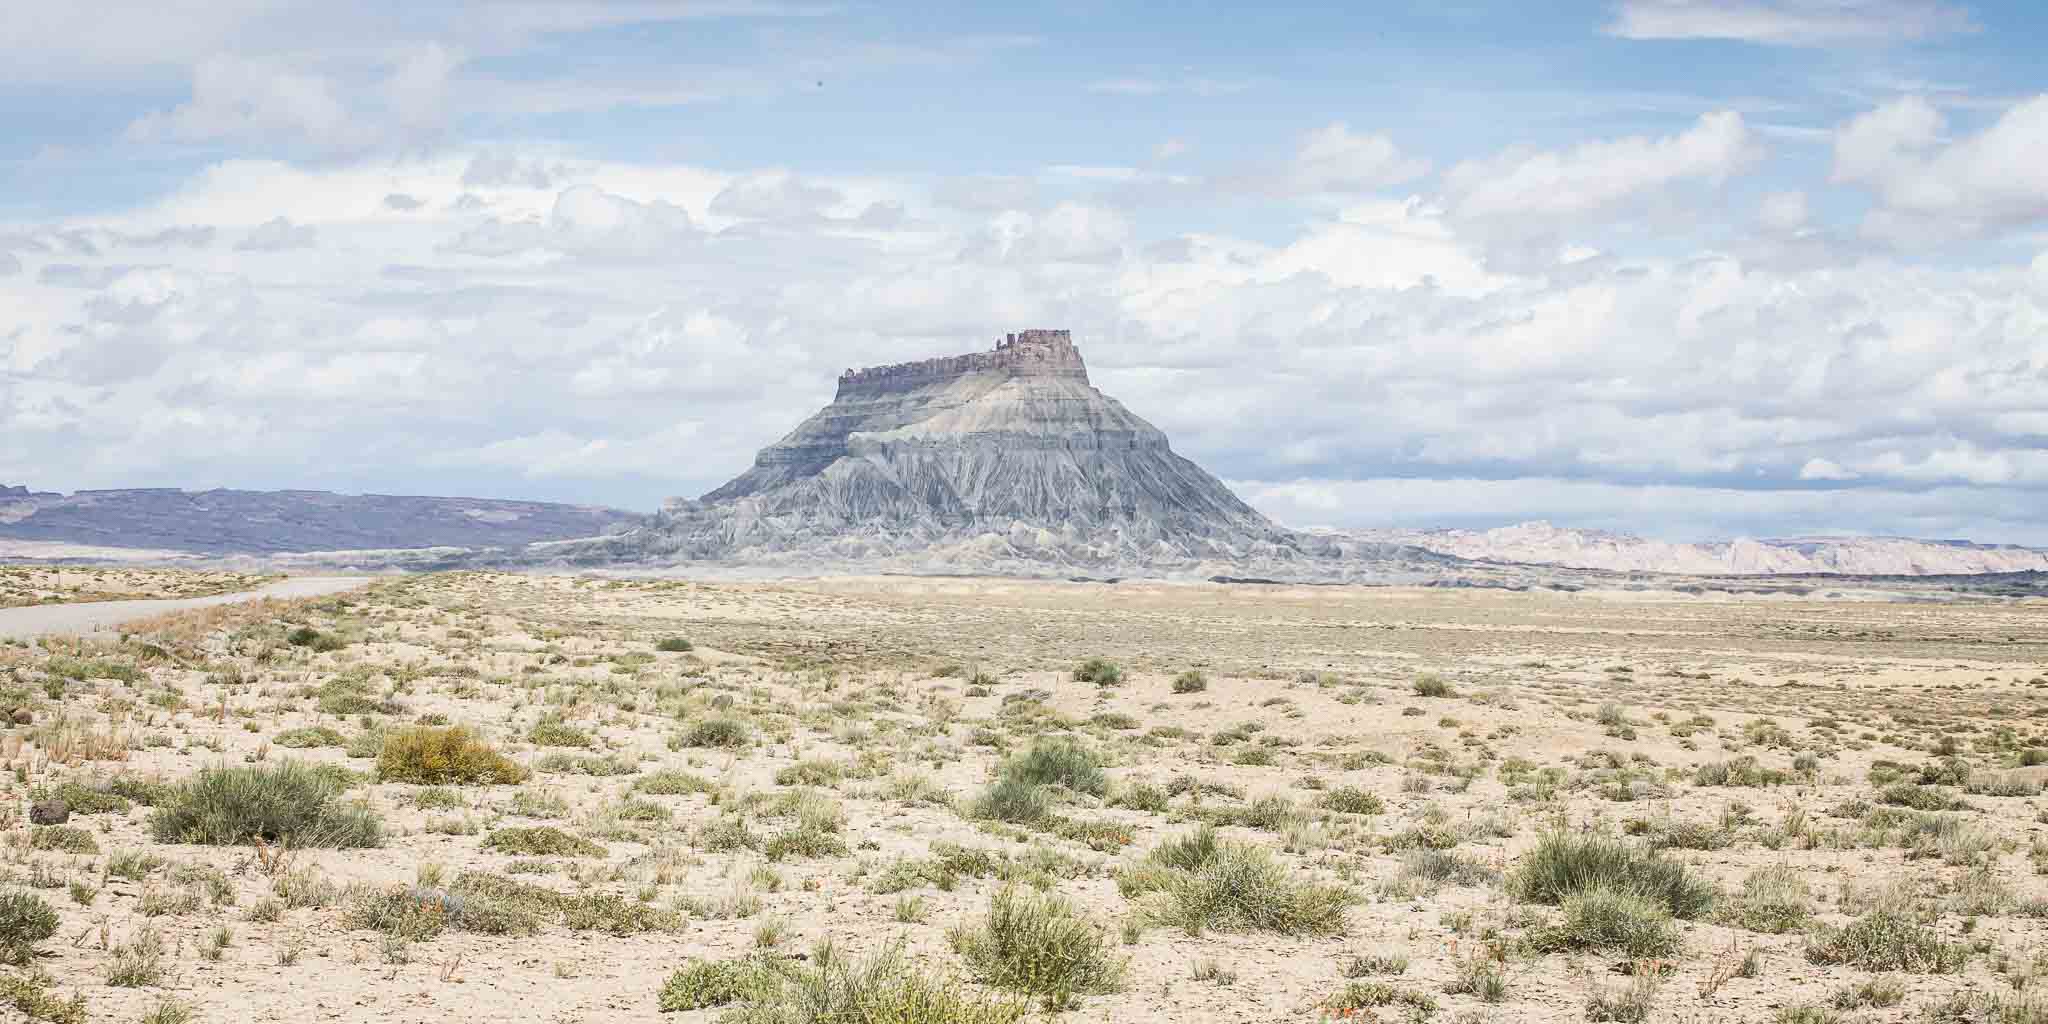 Factory Butte, Caineville Badlands, Caineville UT, May 6, 2015